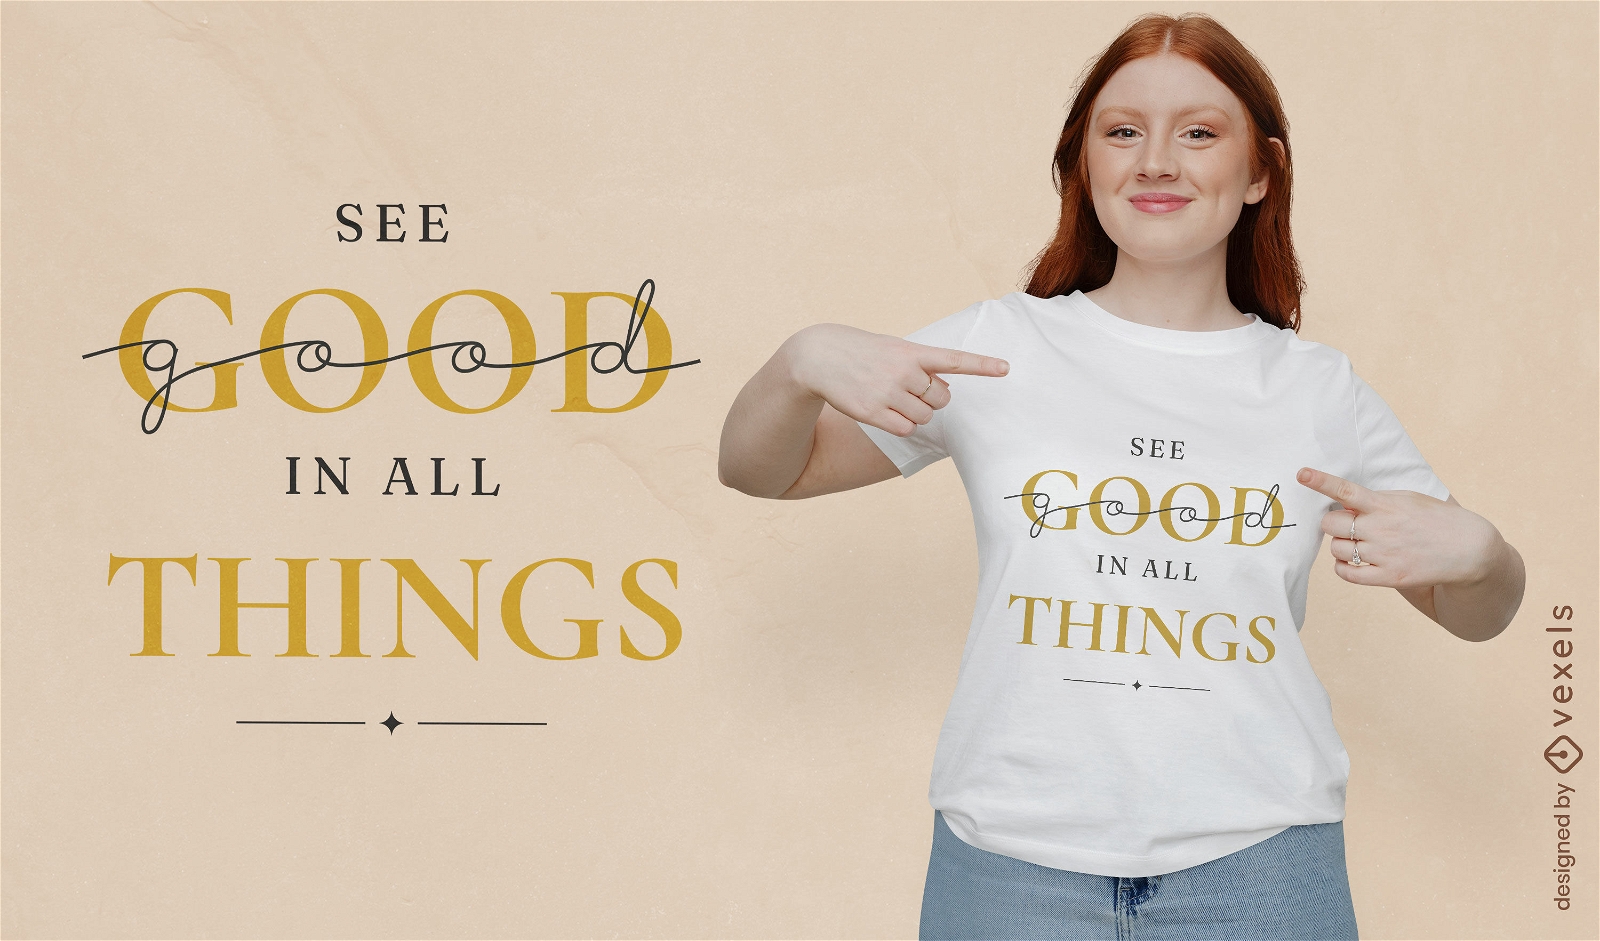 See good quote t-shirt design